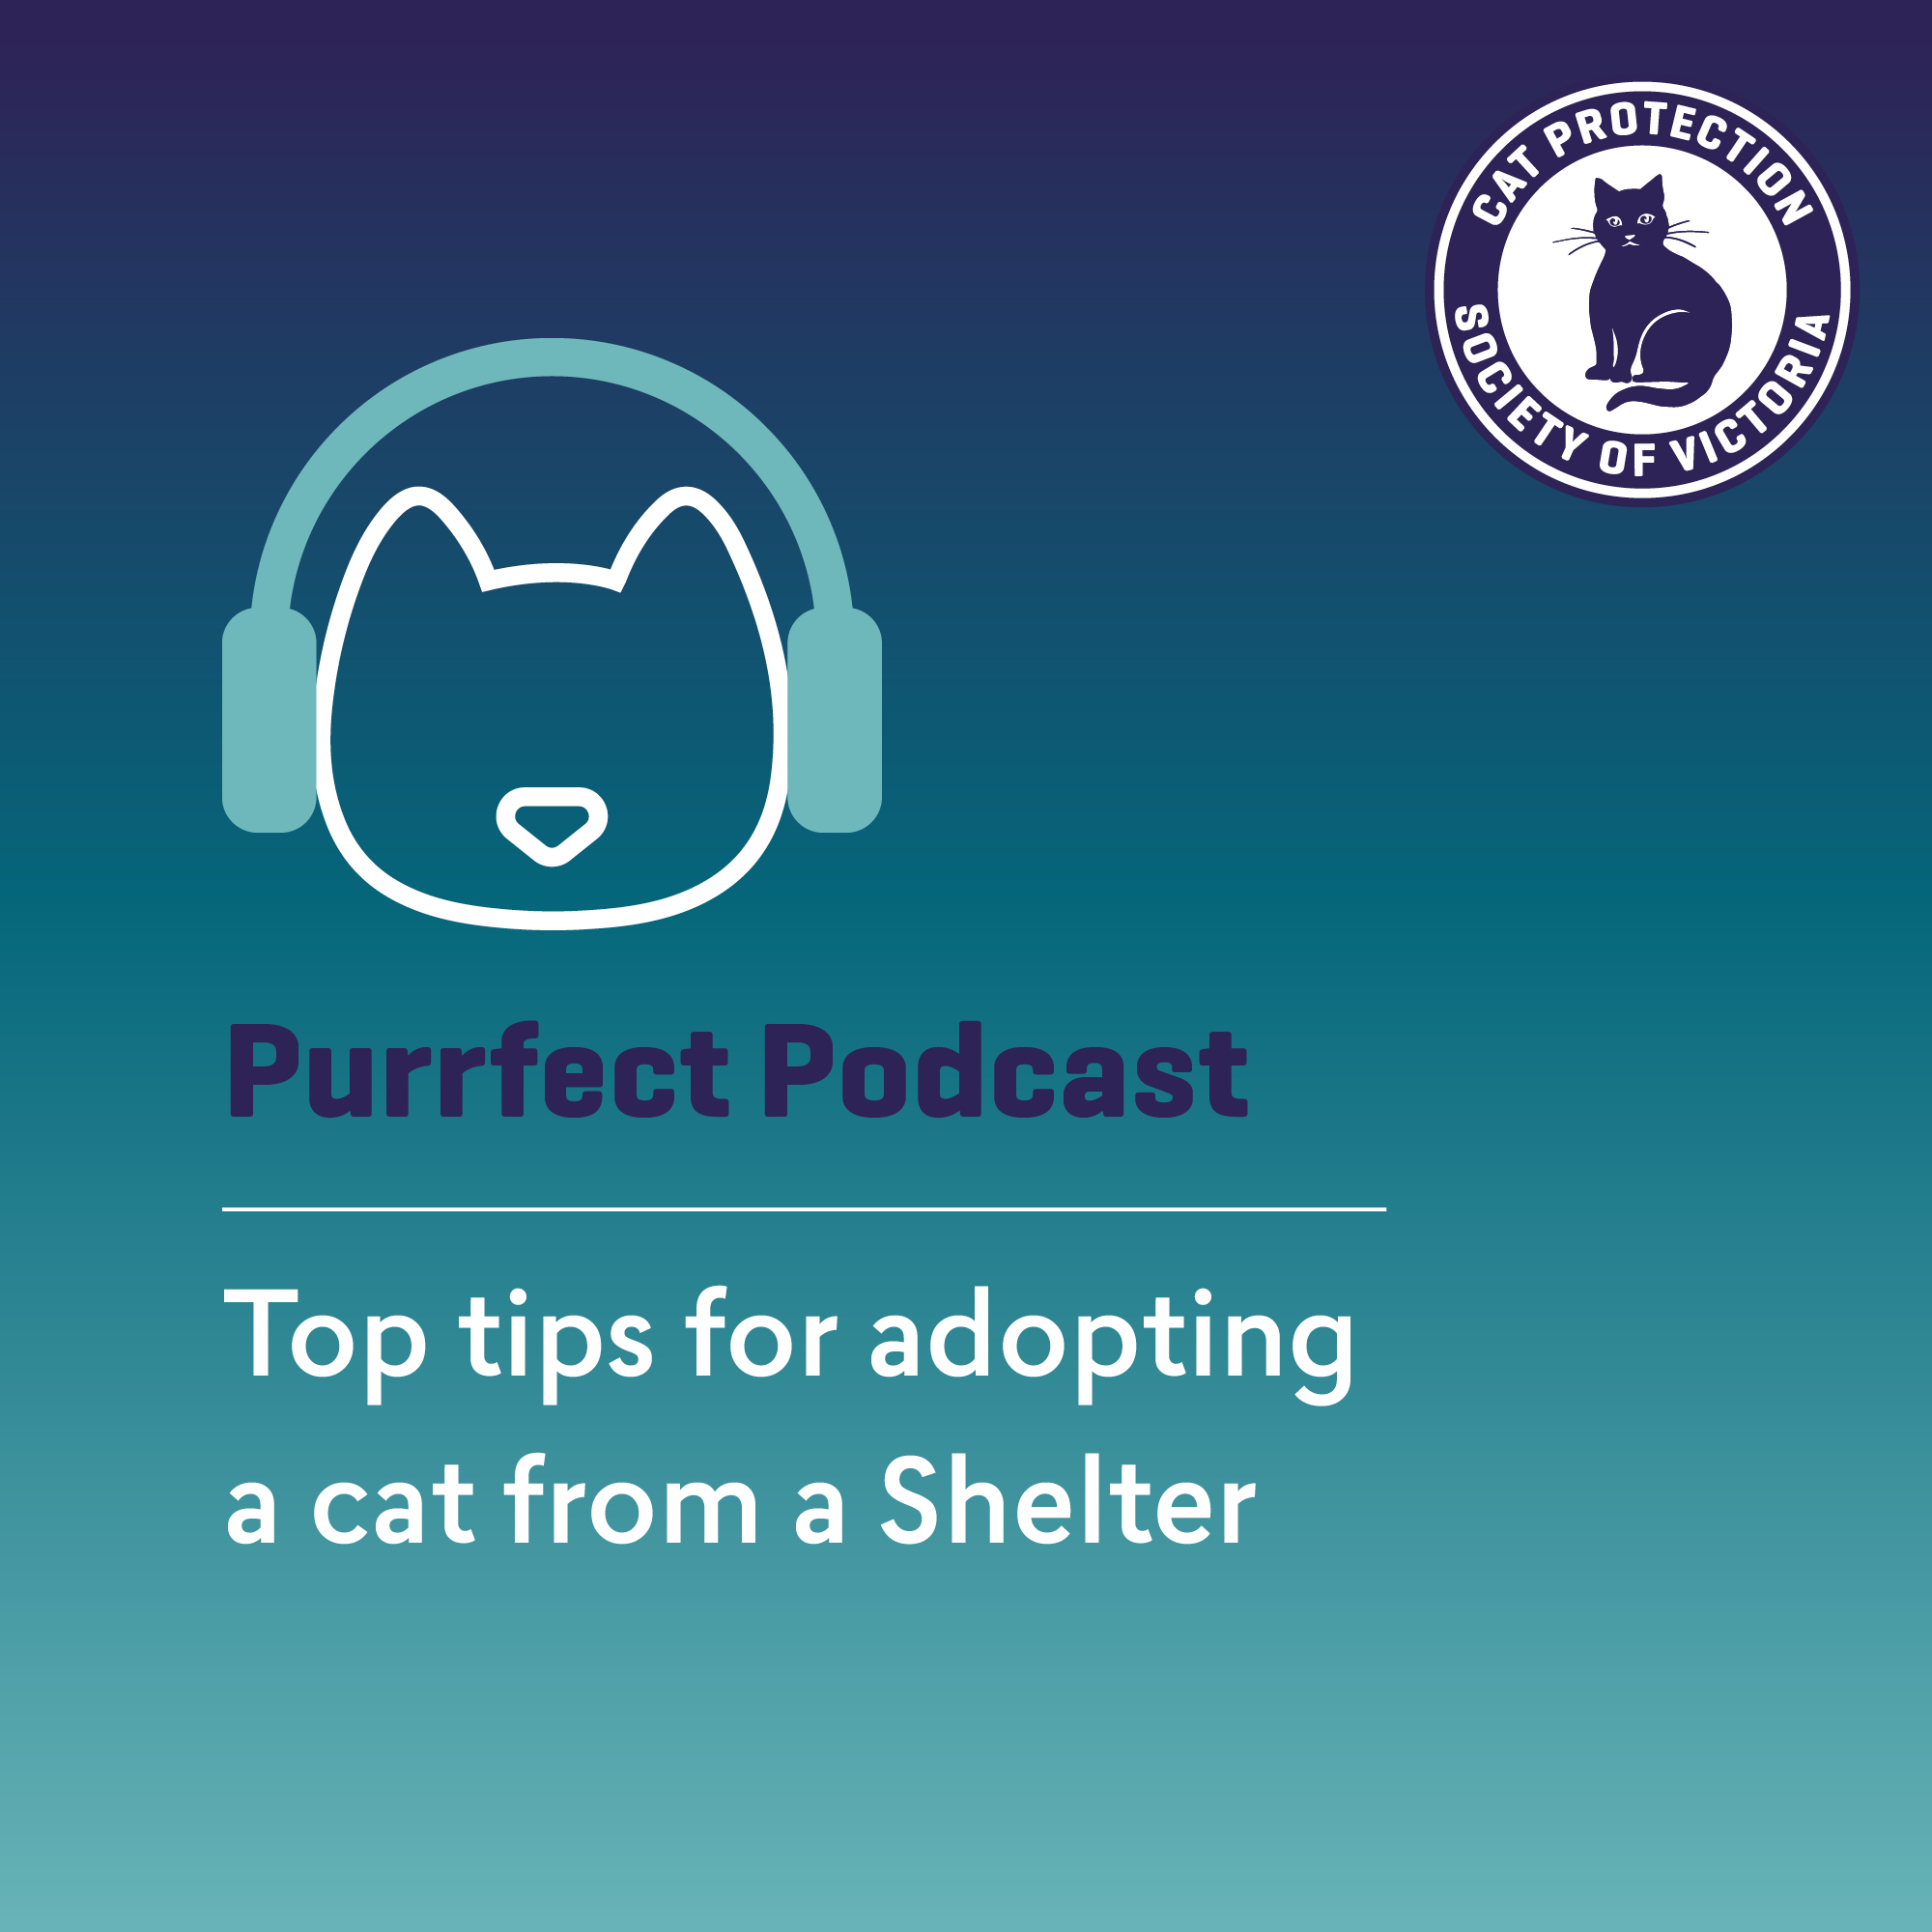 Top tips for adopting from a Shelter